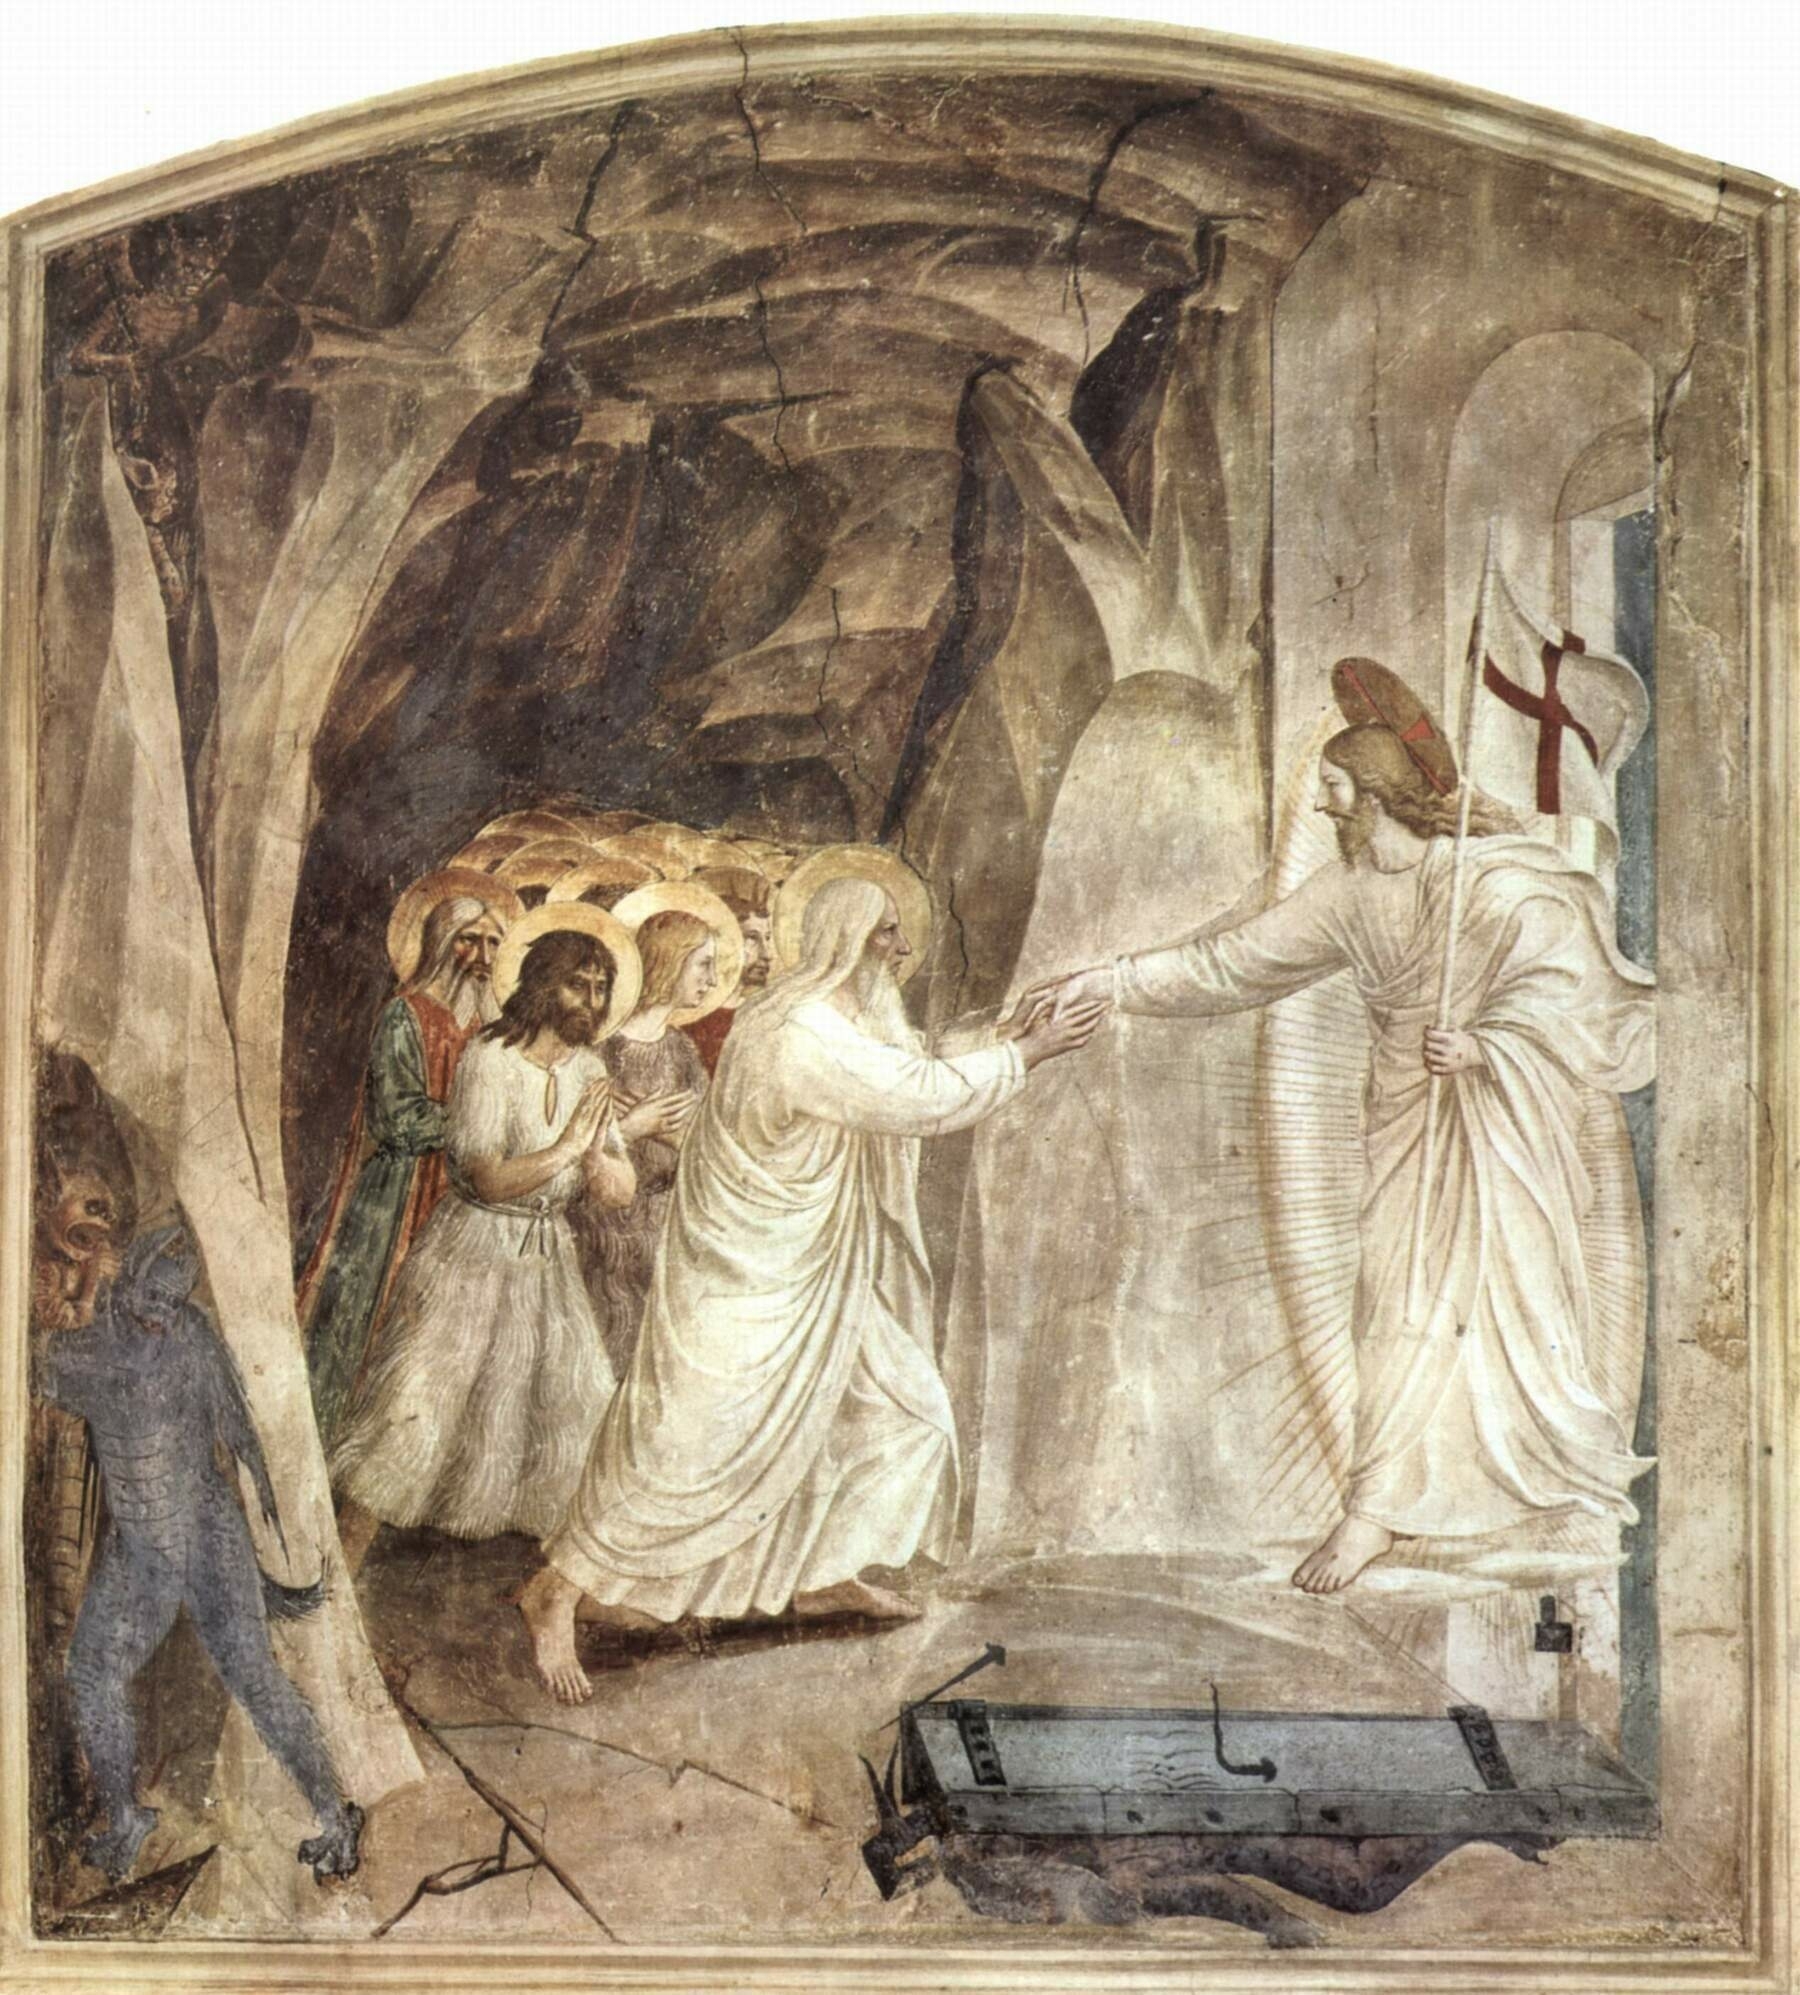 Fra Angelico's Harrowing of Hell